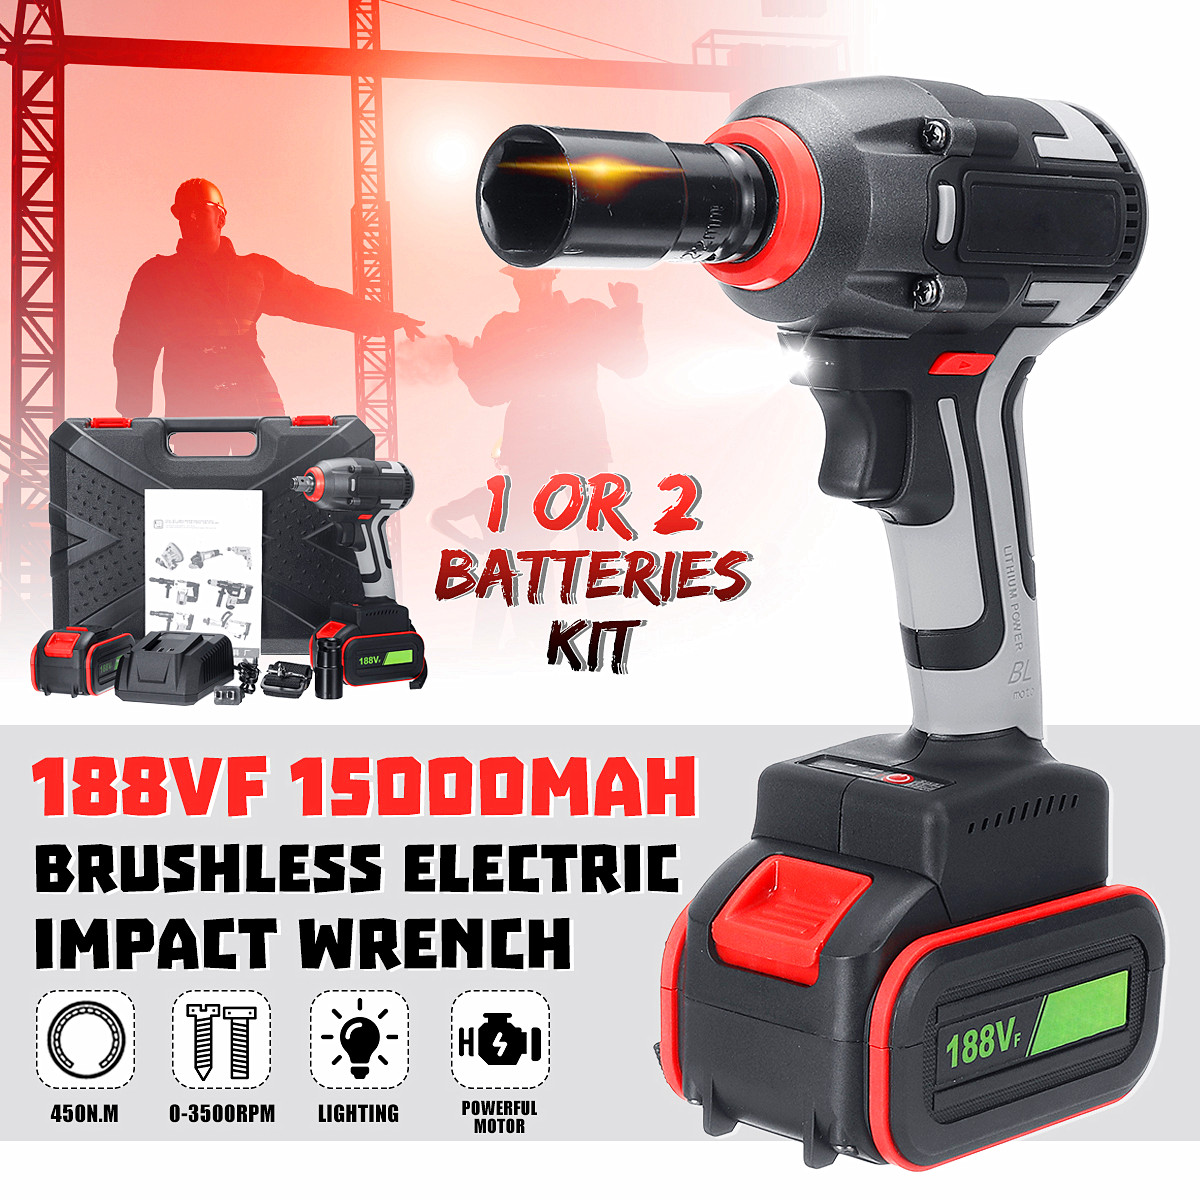 100-240V-Torque-450NM-Electric-Impact-Wrench-Cordless-Motor-Brushless-Rattle-Driver-1444636-1